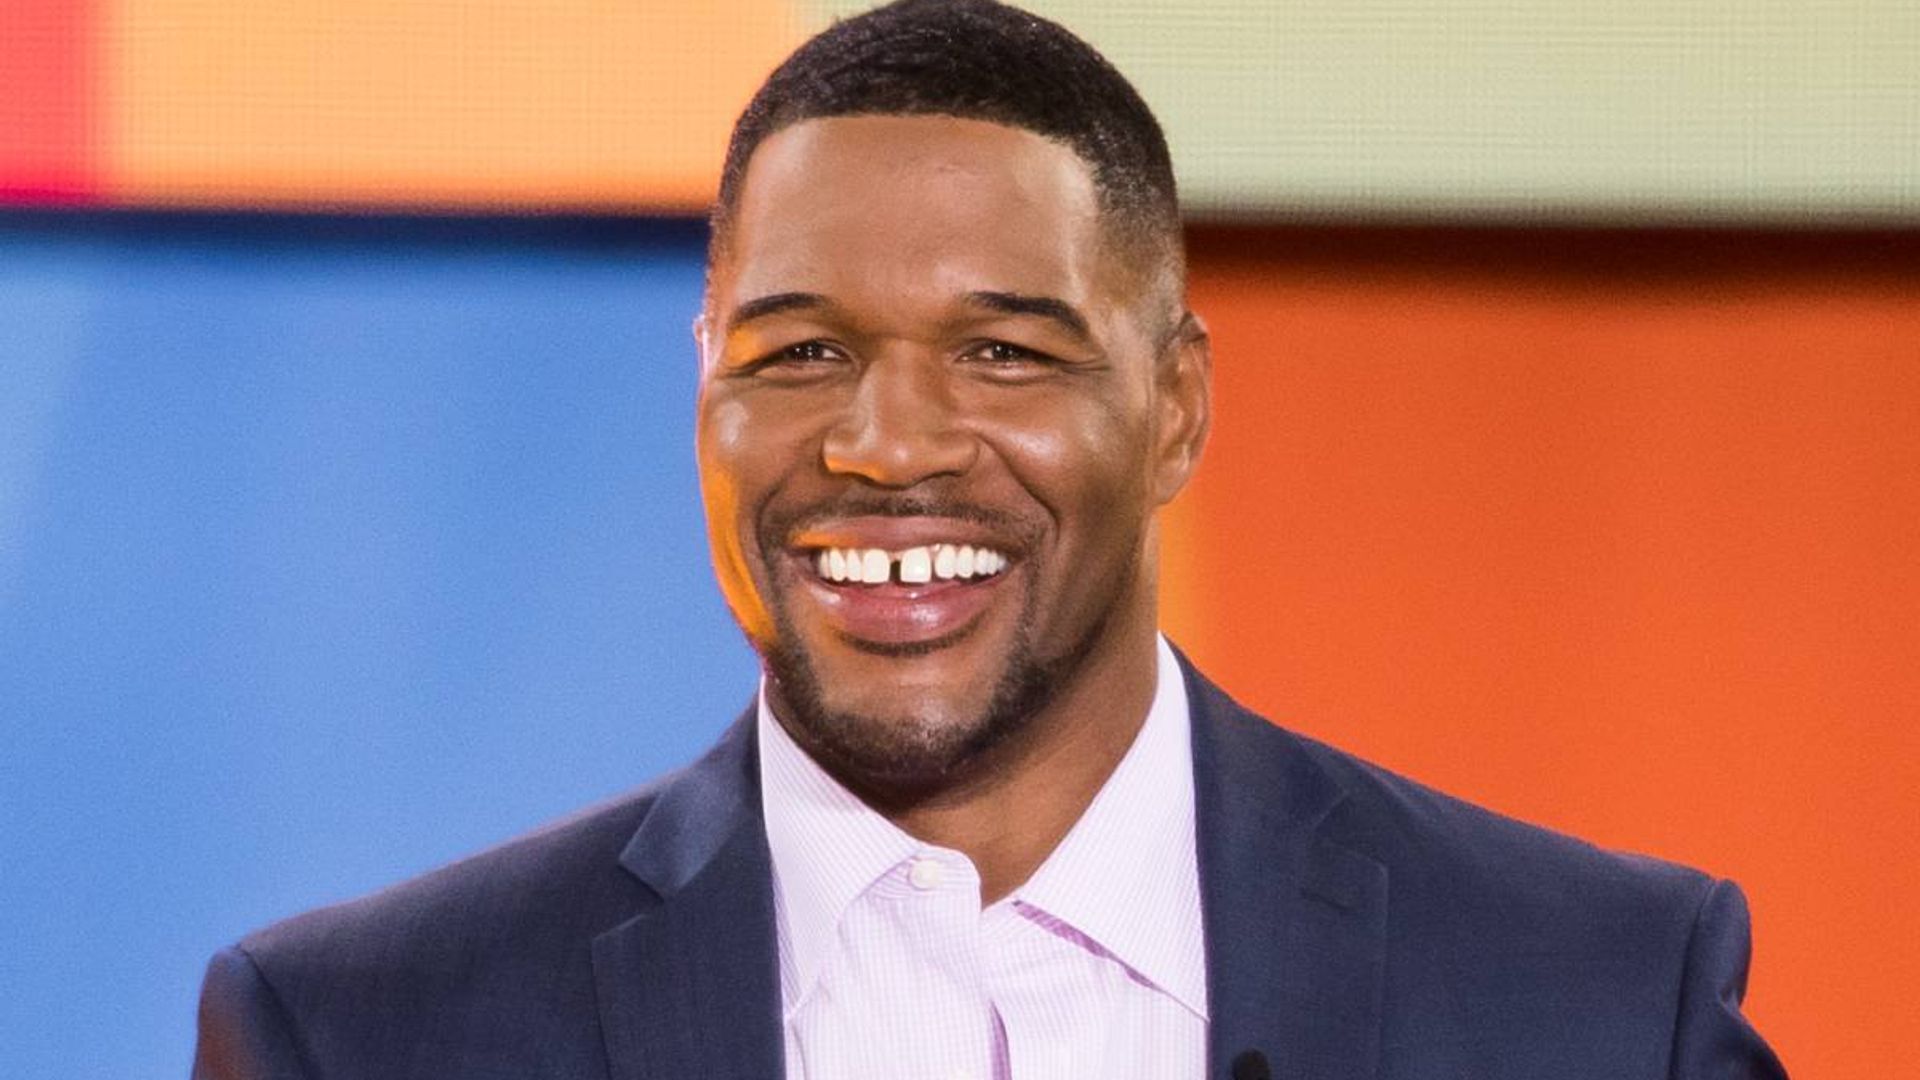 gma michael strahan sparks reaction new video